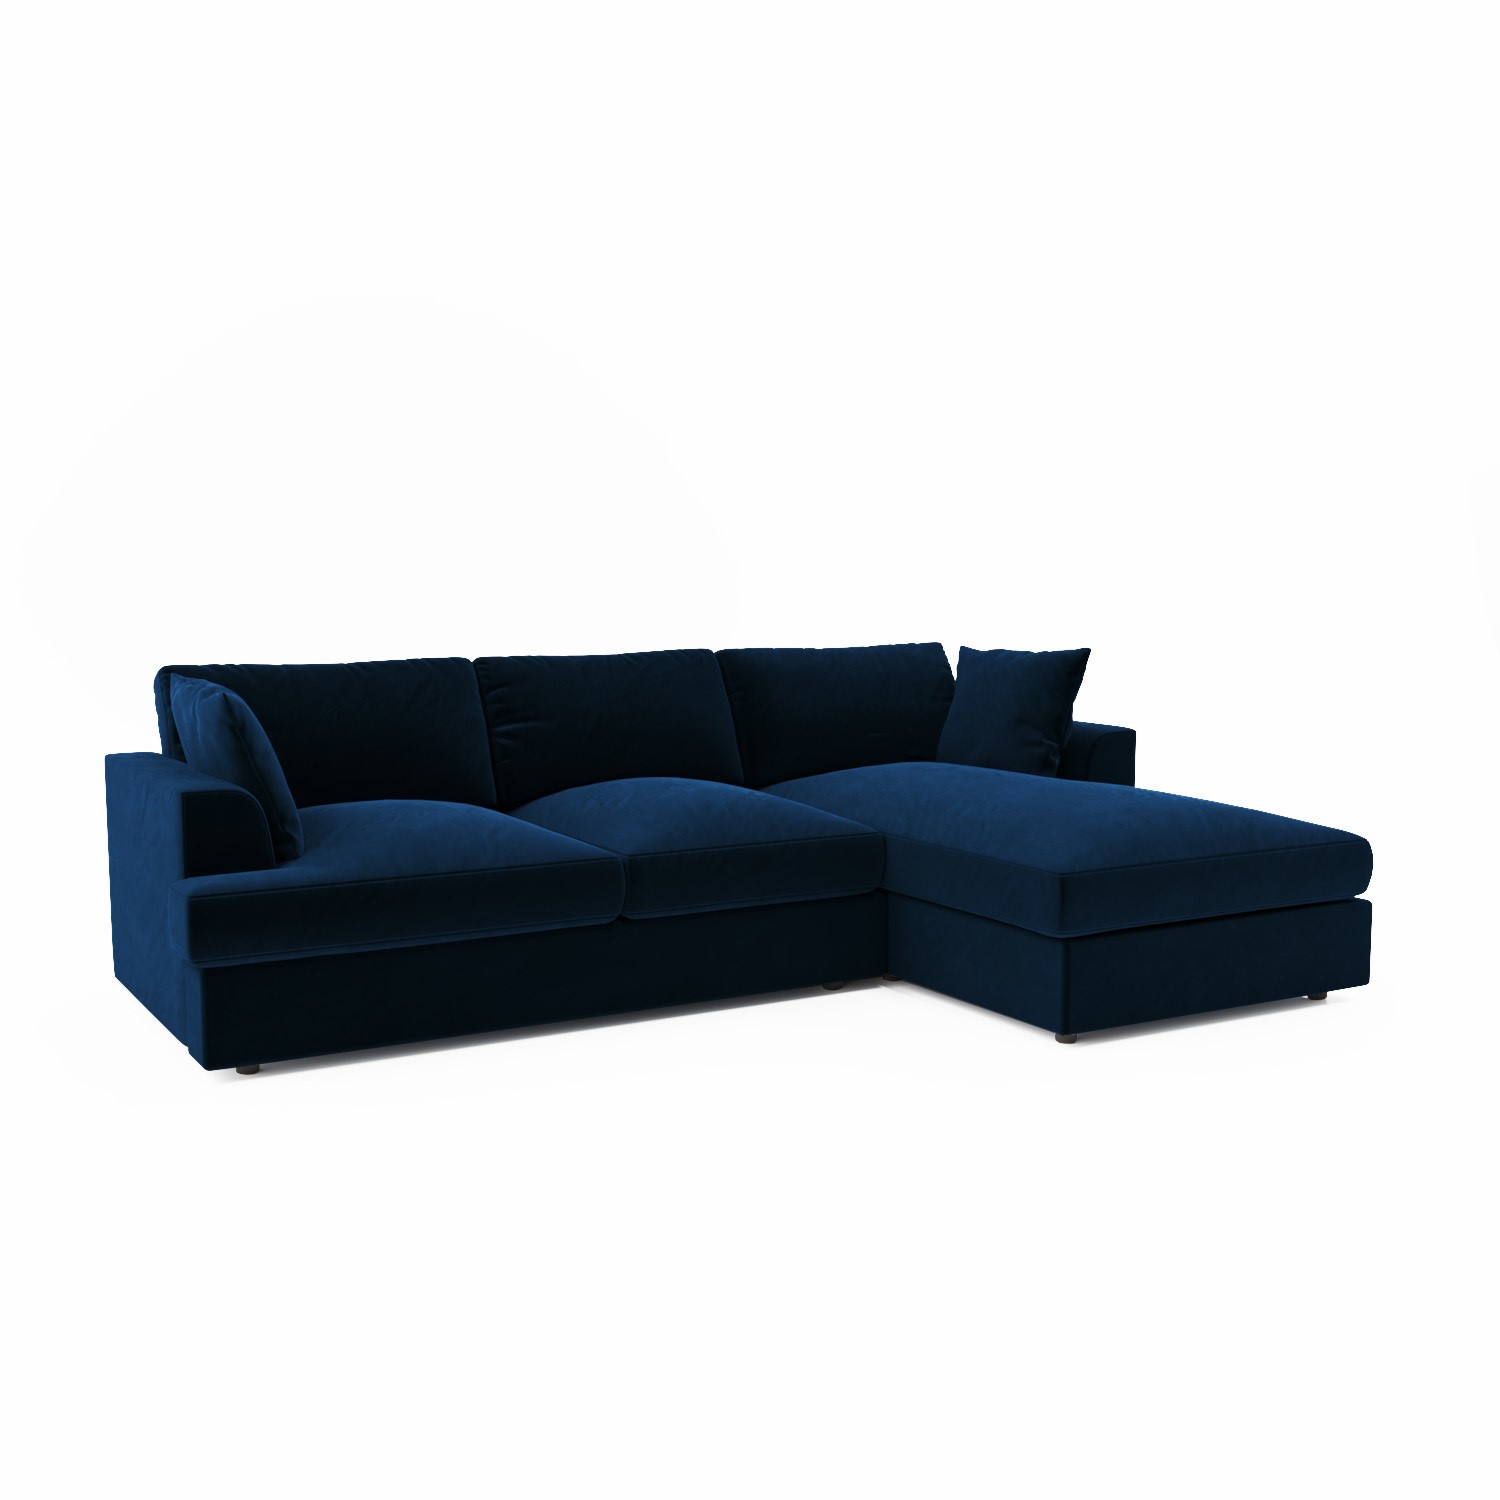 Photo of Large navy velvet right hand facing l shaped sofa - seats 4 - august